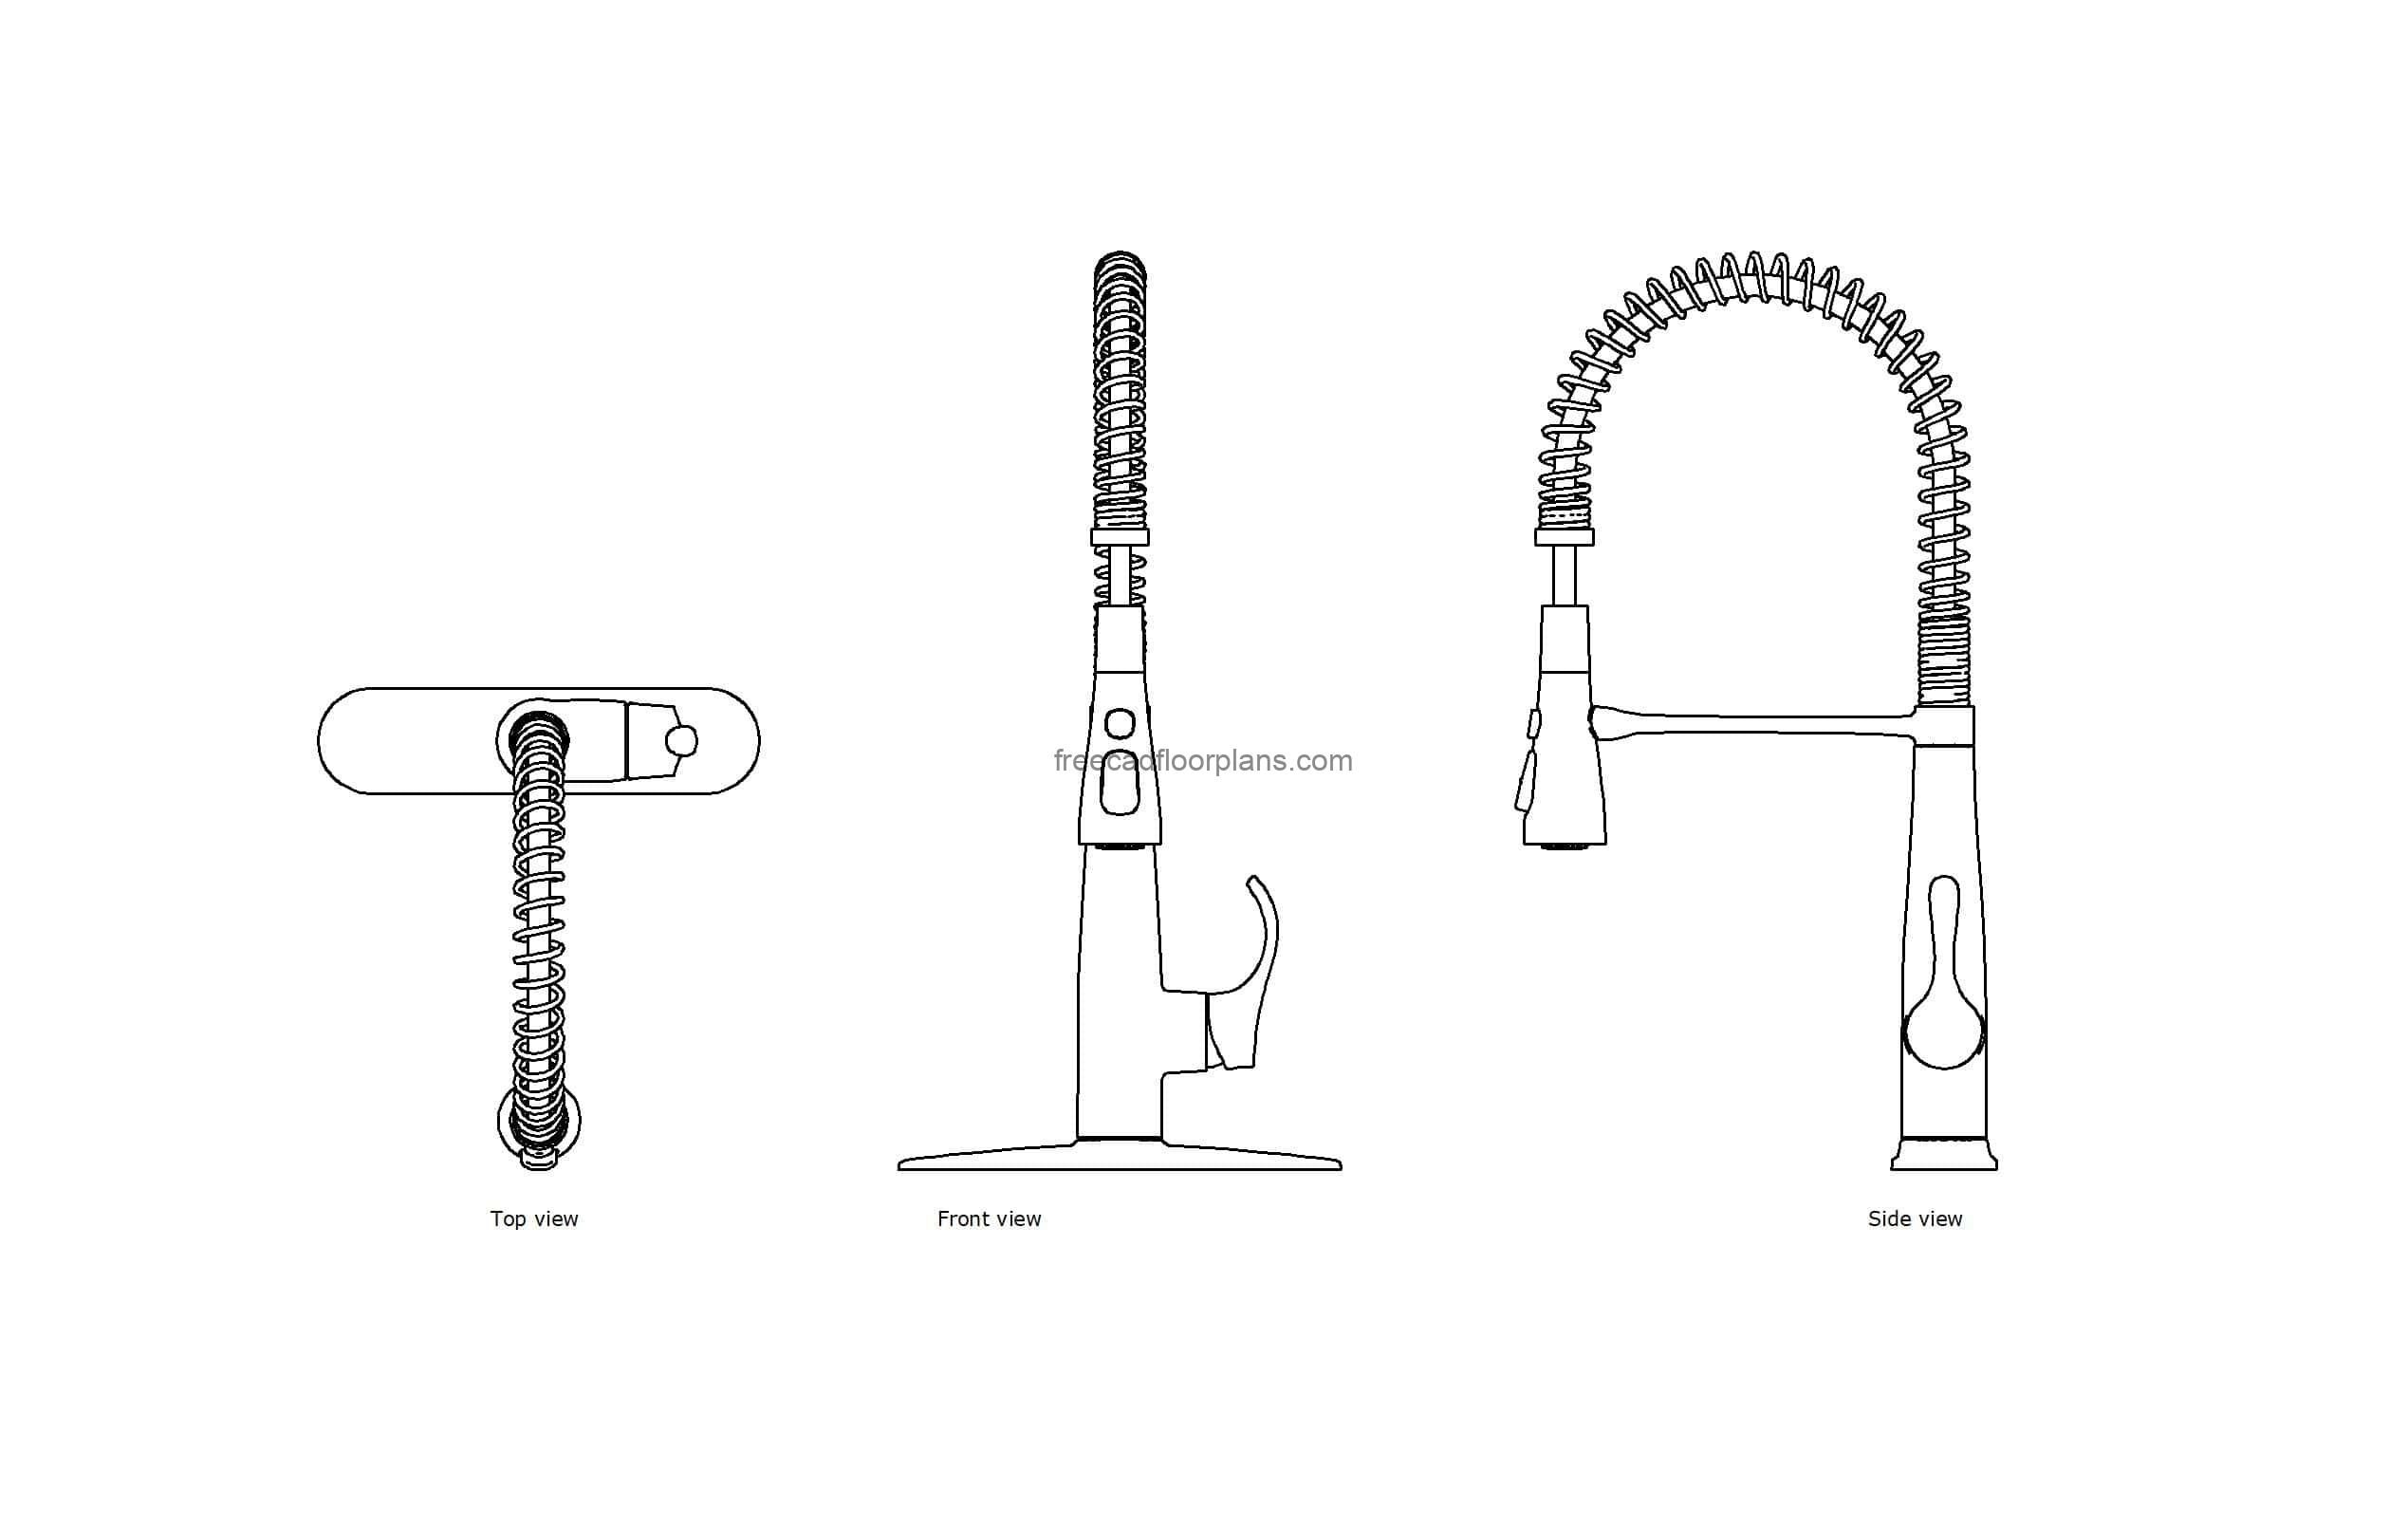 autocad drawing of a chef faucet, plan and elevation 2d views, dwg file free for download